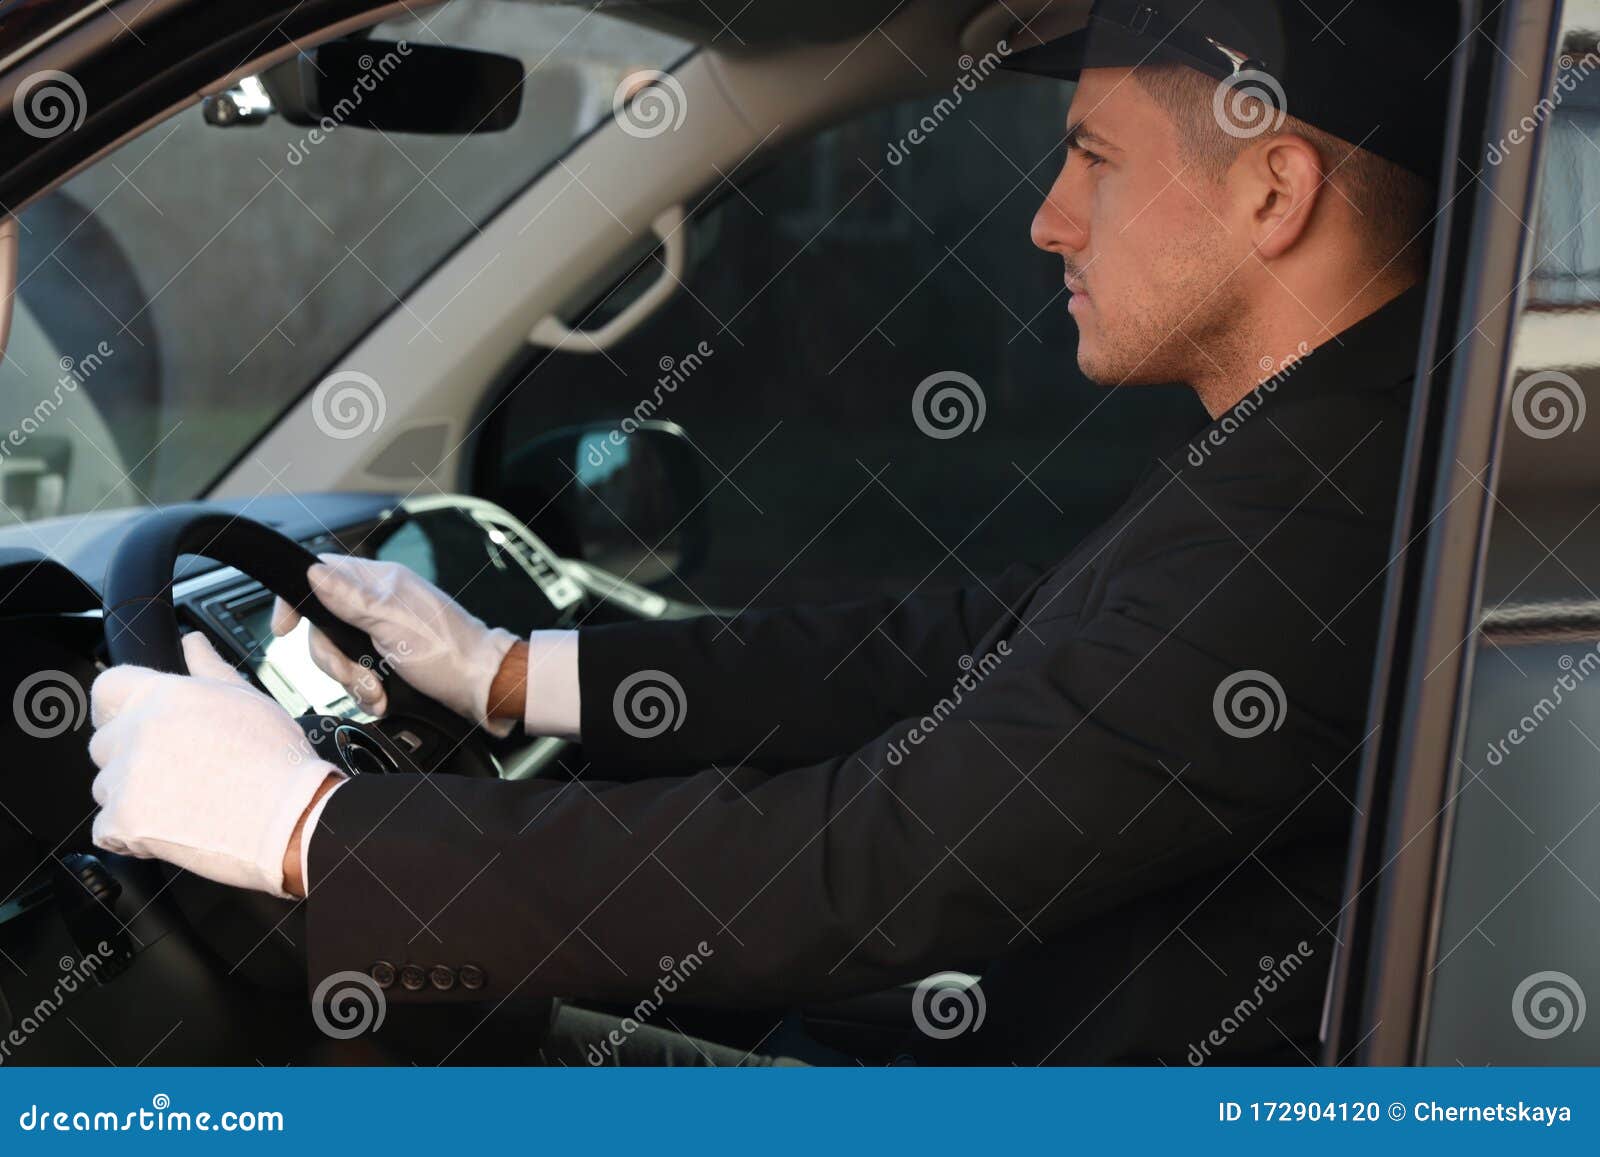 Professional Driver In Car. Chauffeur Service Stock Photo